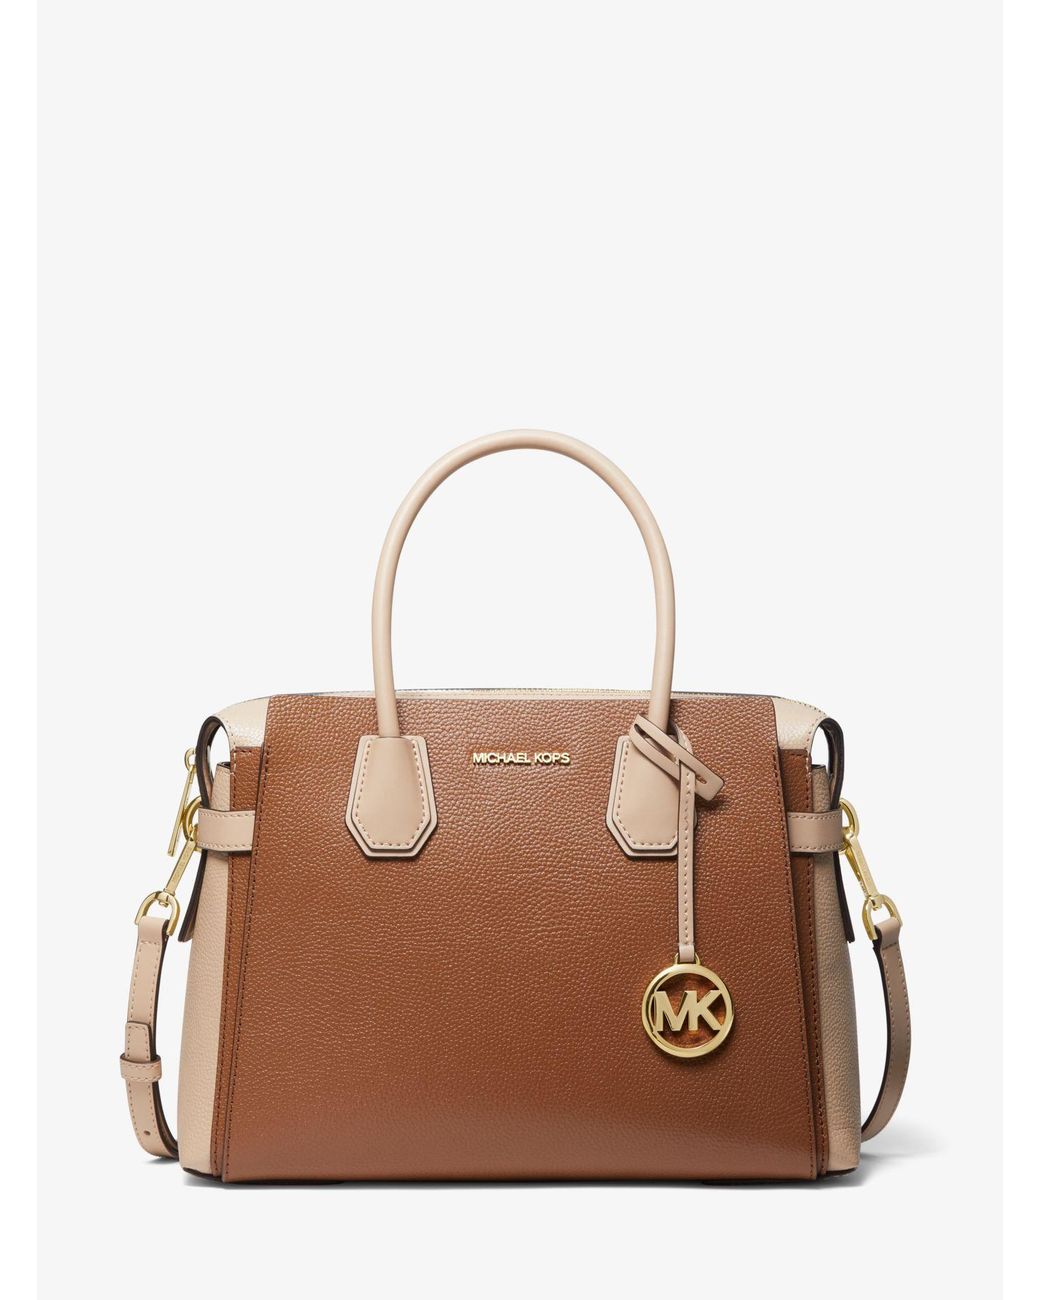 Michael Kors Mercer Medium Two-tone Pebbled Leather Belted Satchel in ...